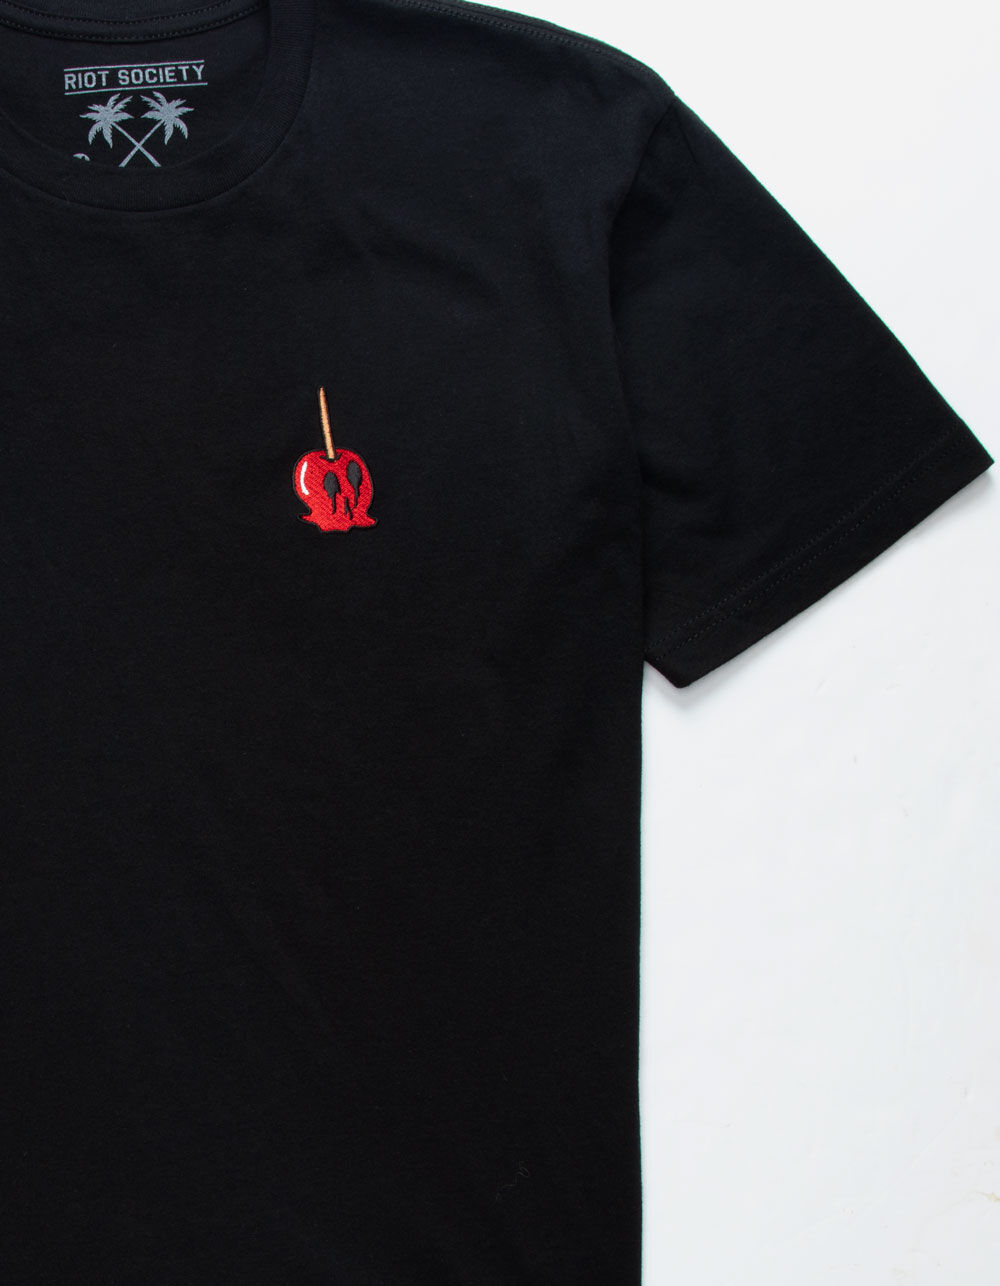 RIOT SOCIETY Skull Apple Embroidery Mens T-Shirt image number 1